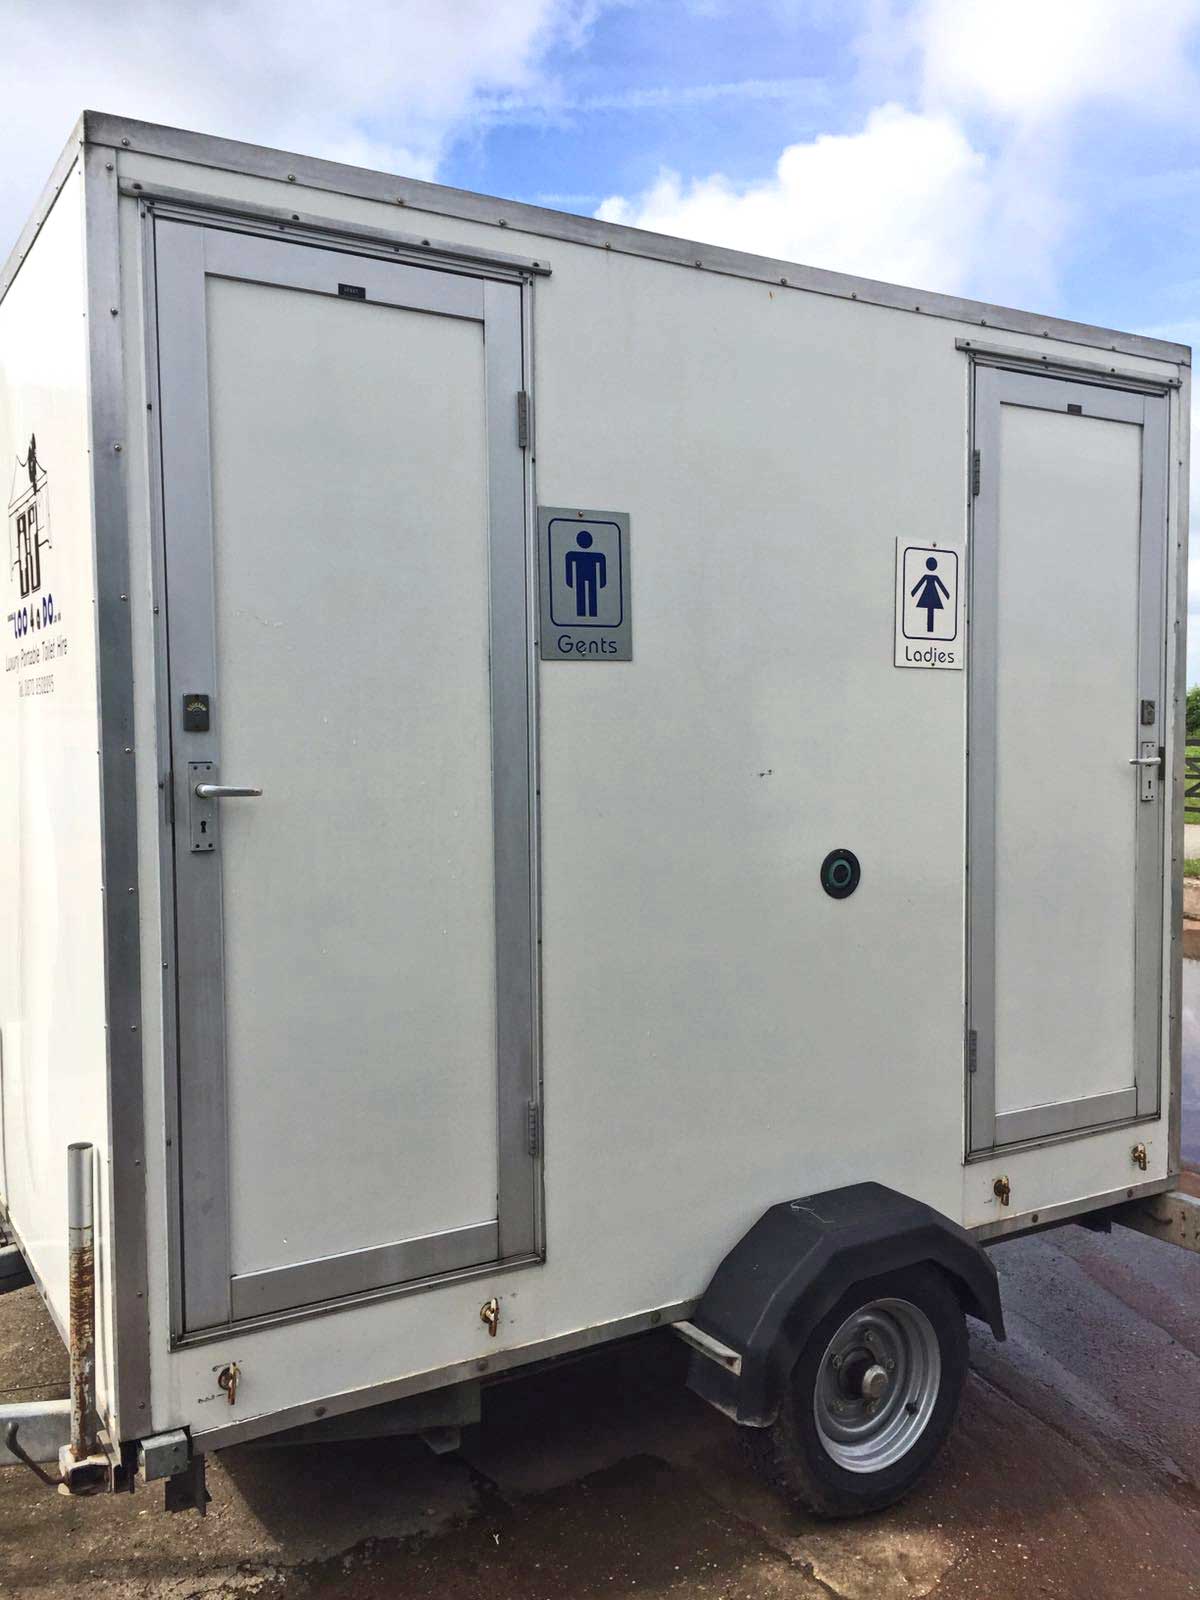 1+1 toilet trailer for hire at your event for use of up to 150 people